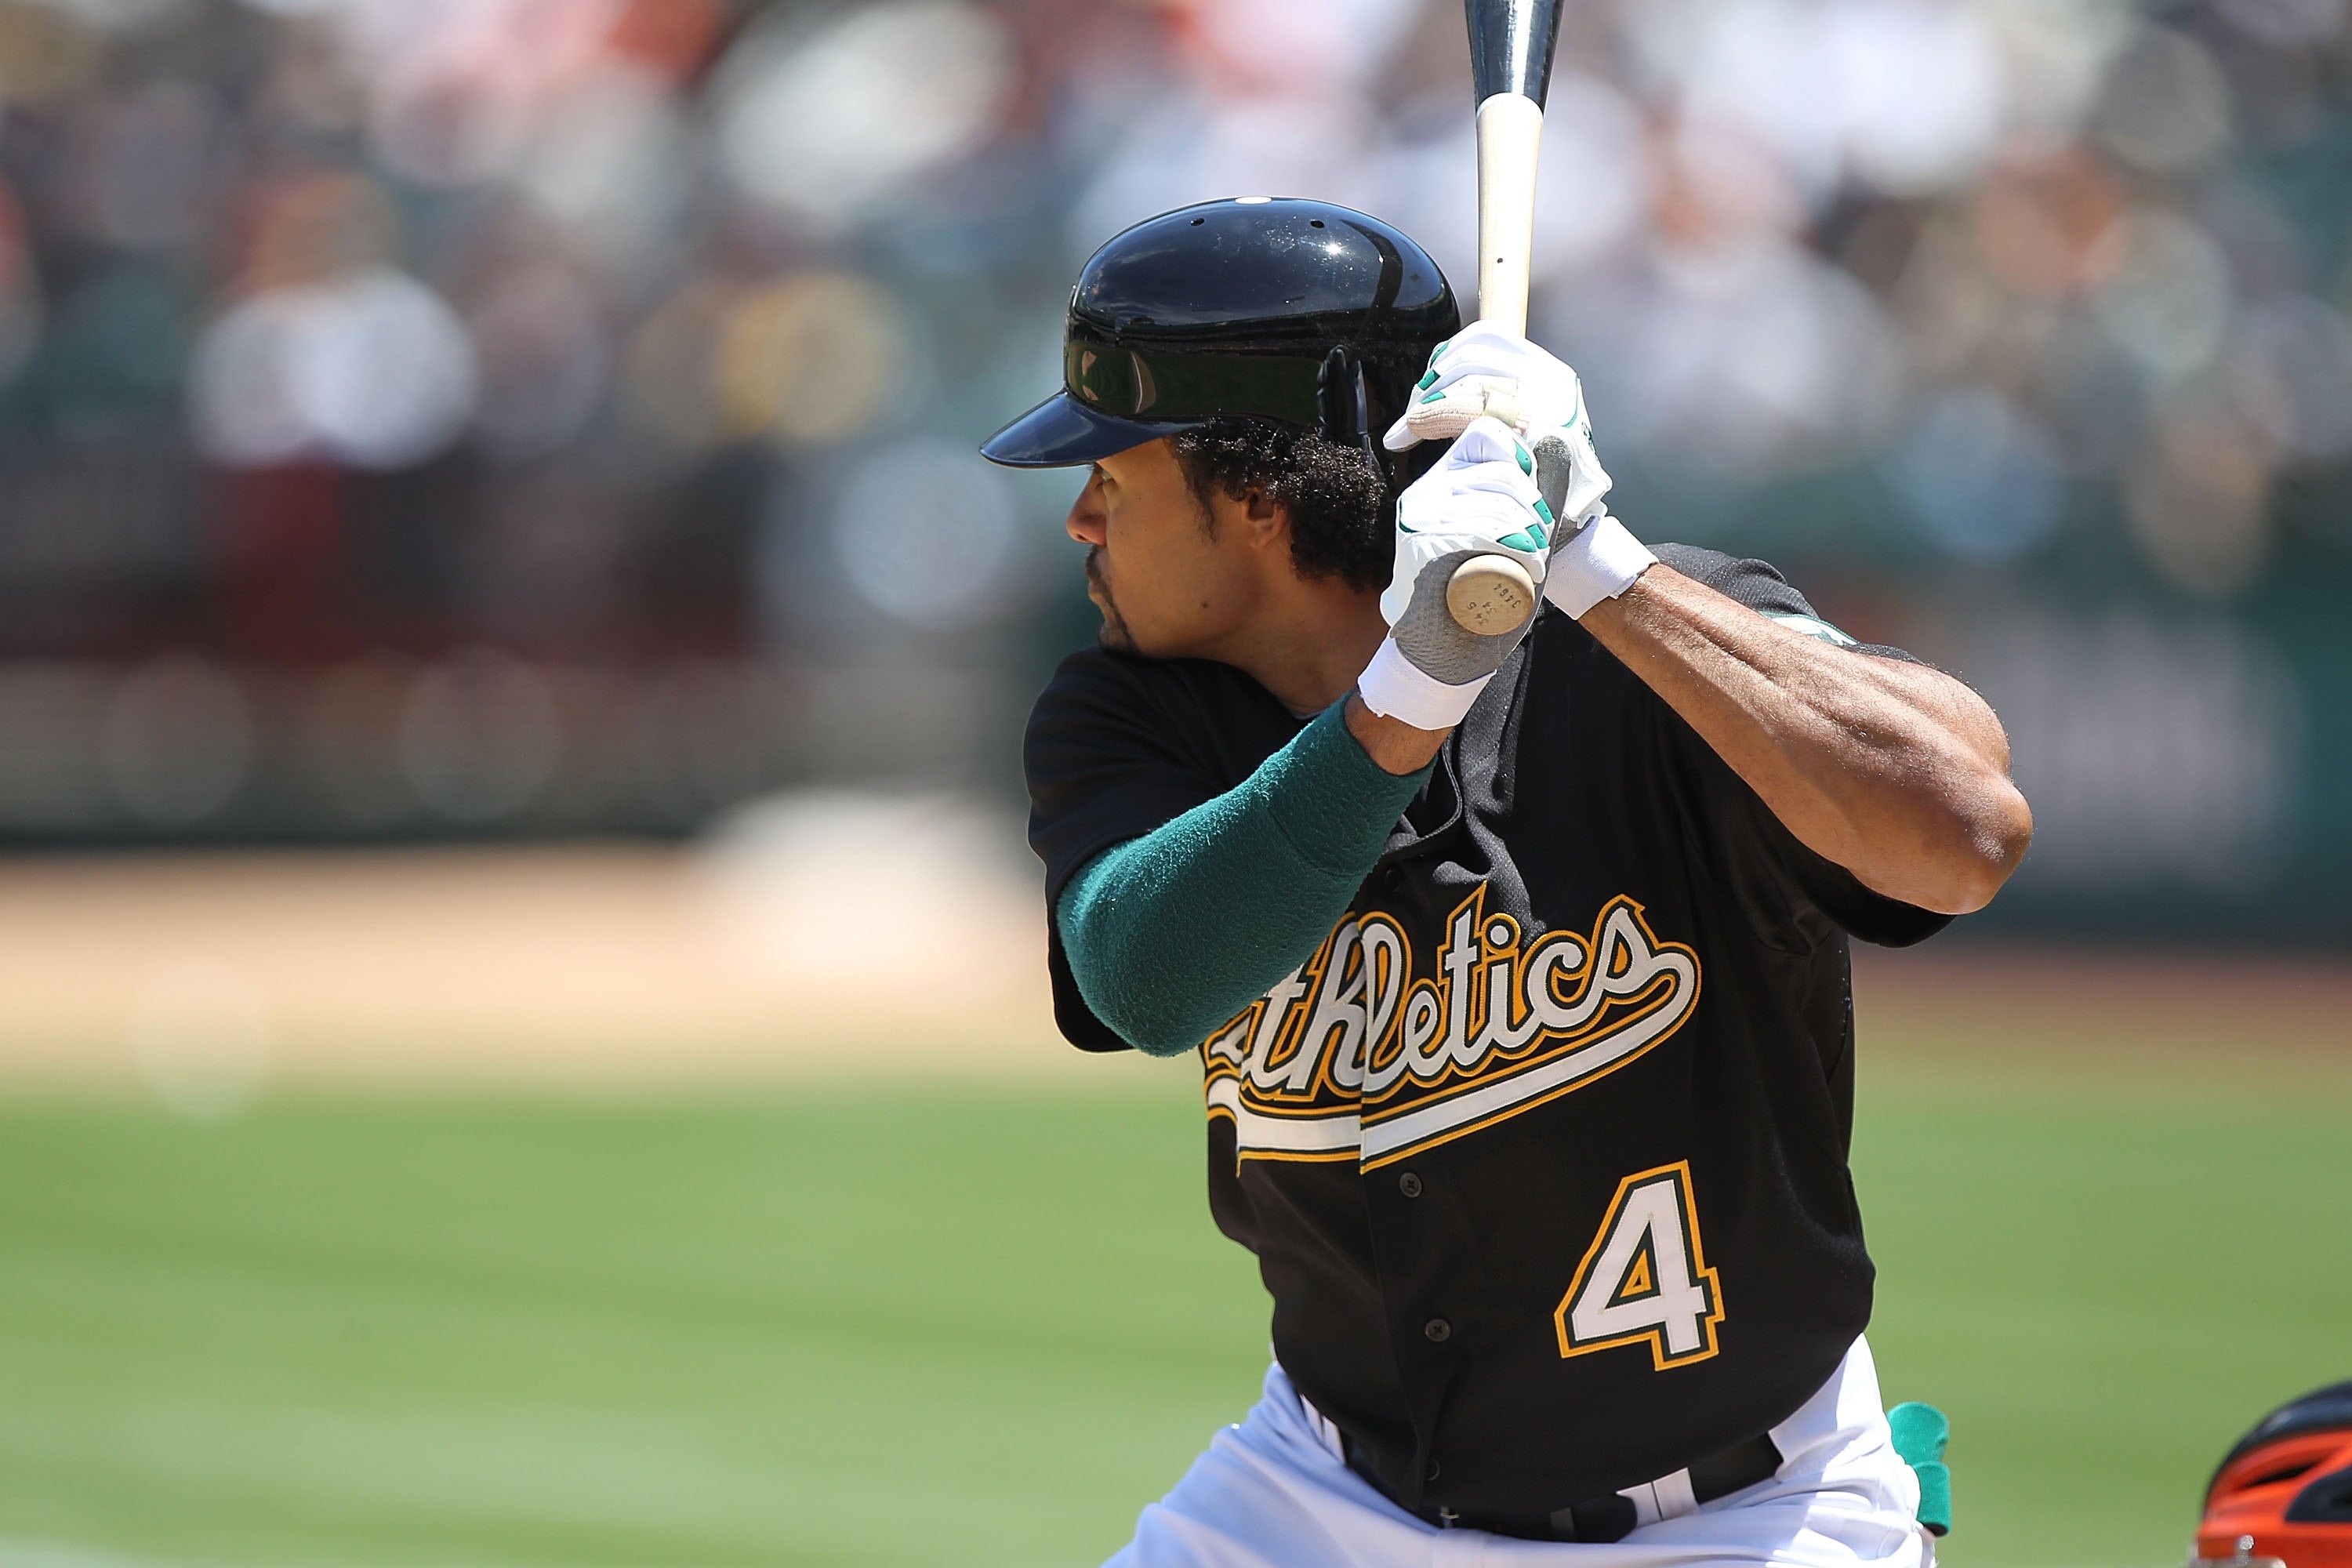 Oakland A's outfielder Coco Crisp proving his value at plate and